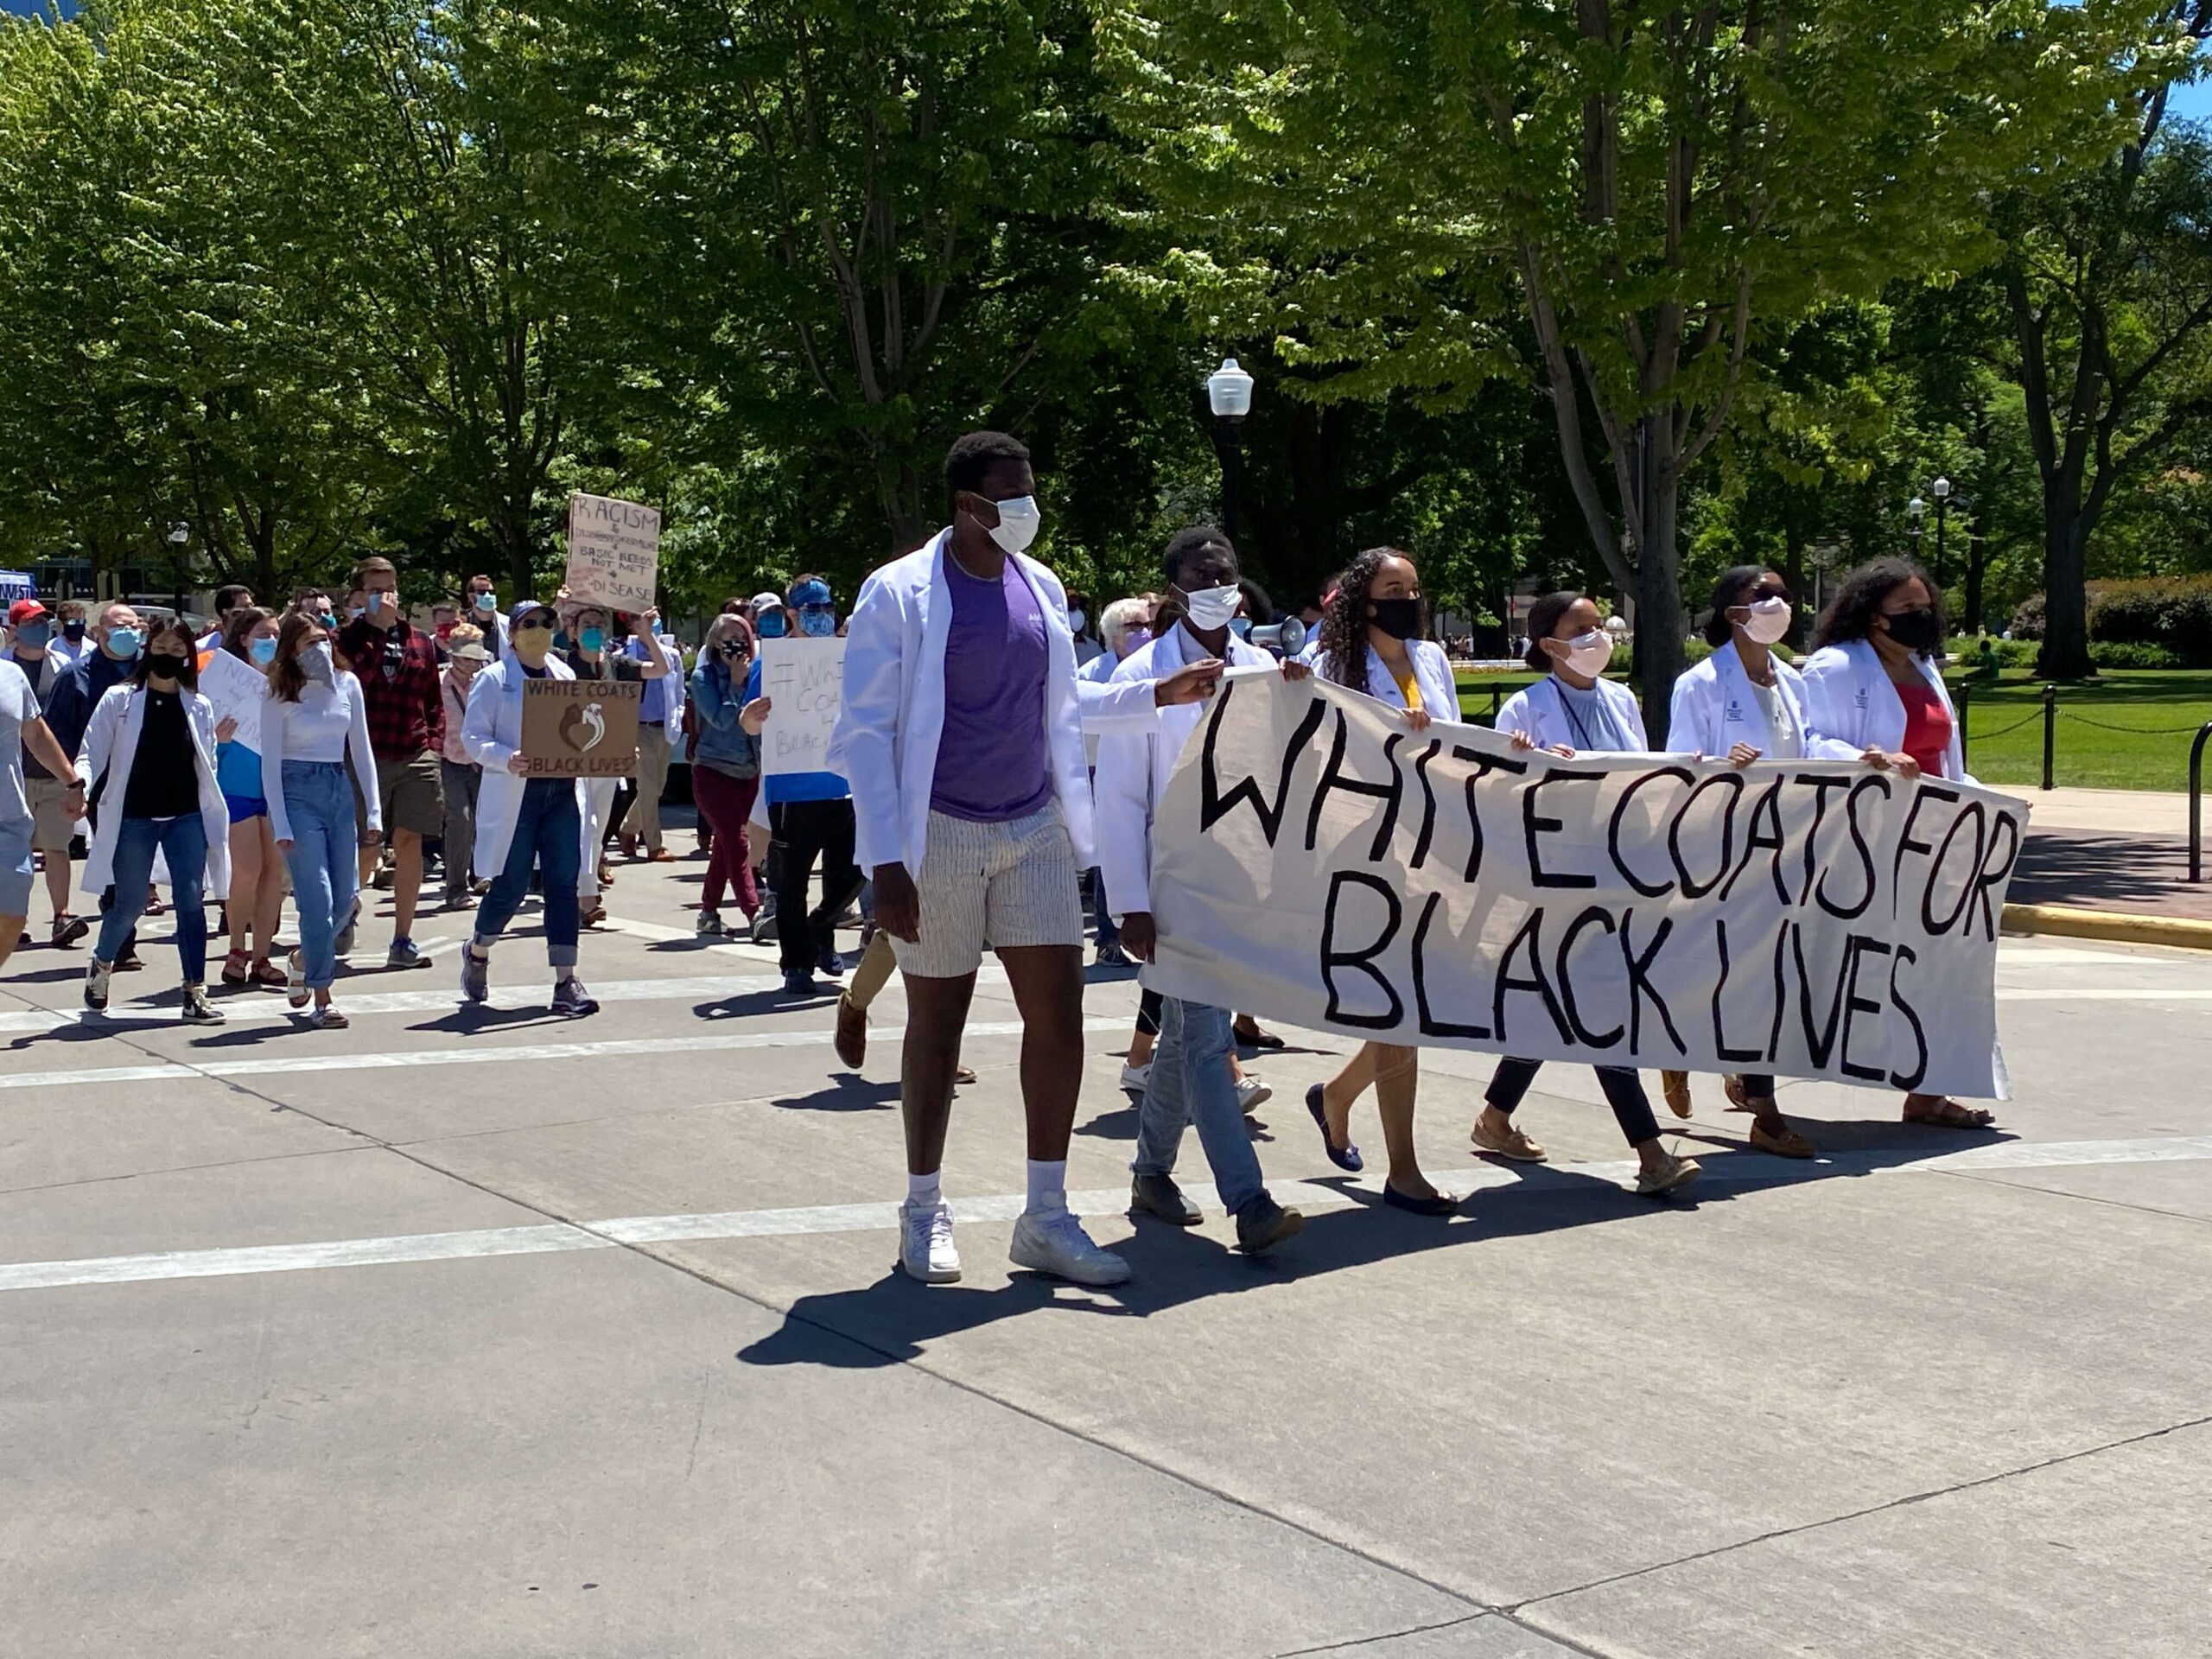 Pharm students wearing white coats and masks walking in protest with a sign reading "White Coats for Black Lives"